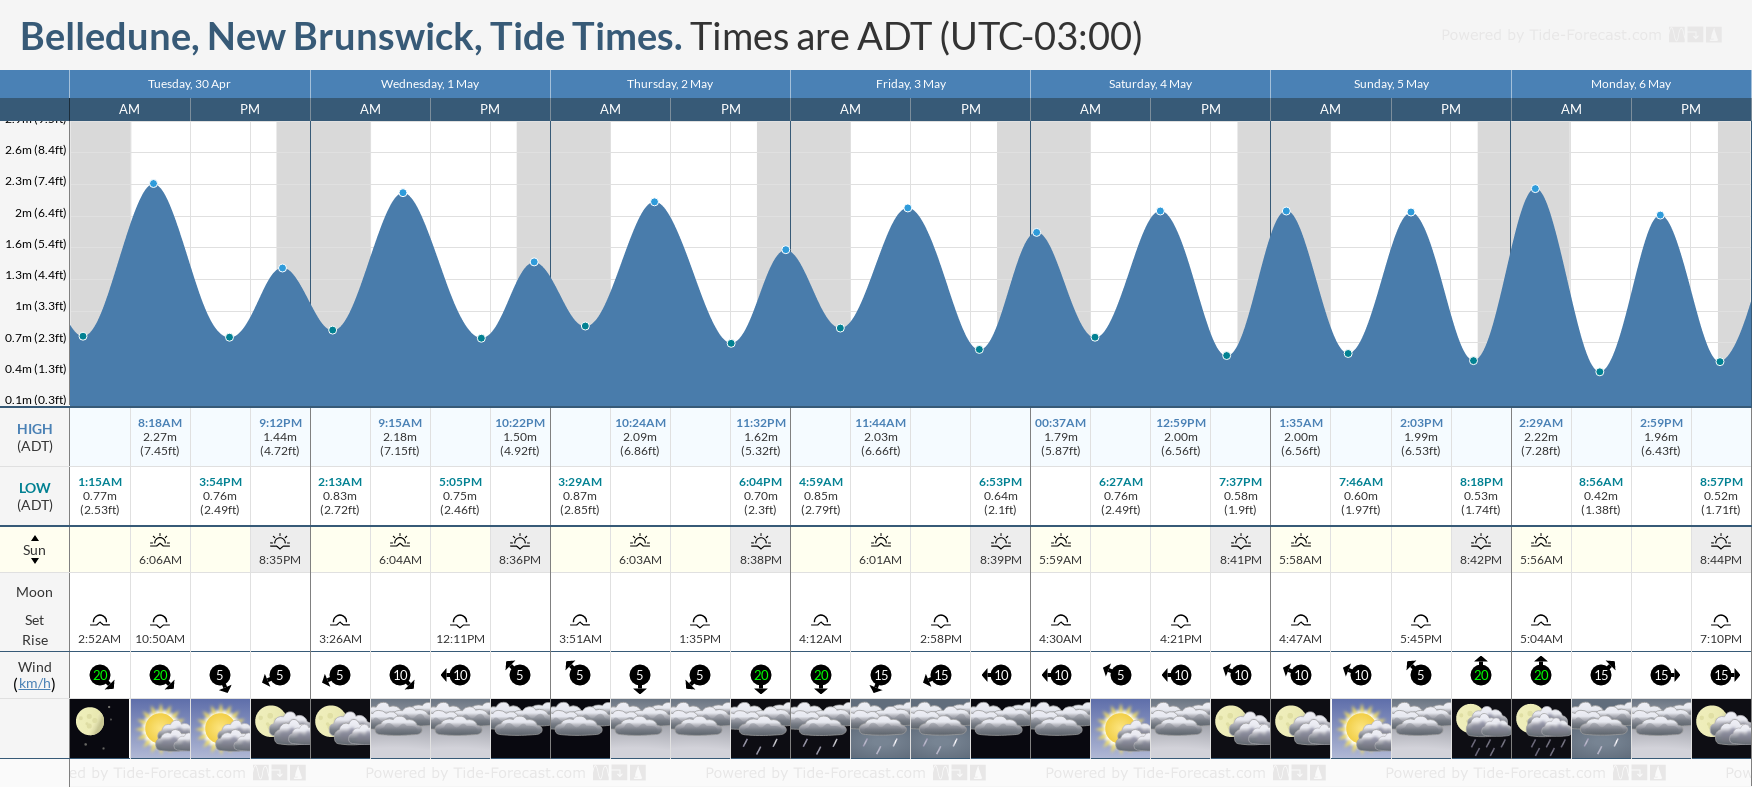 Belledune, New Brunswick Tide Chart including high and low tide tide times for the next 7 days